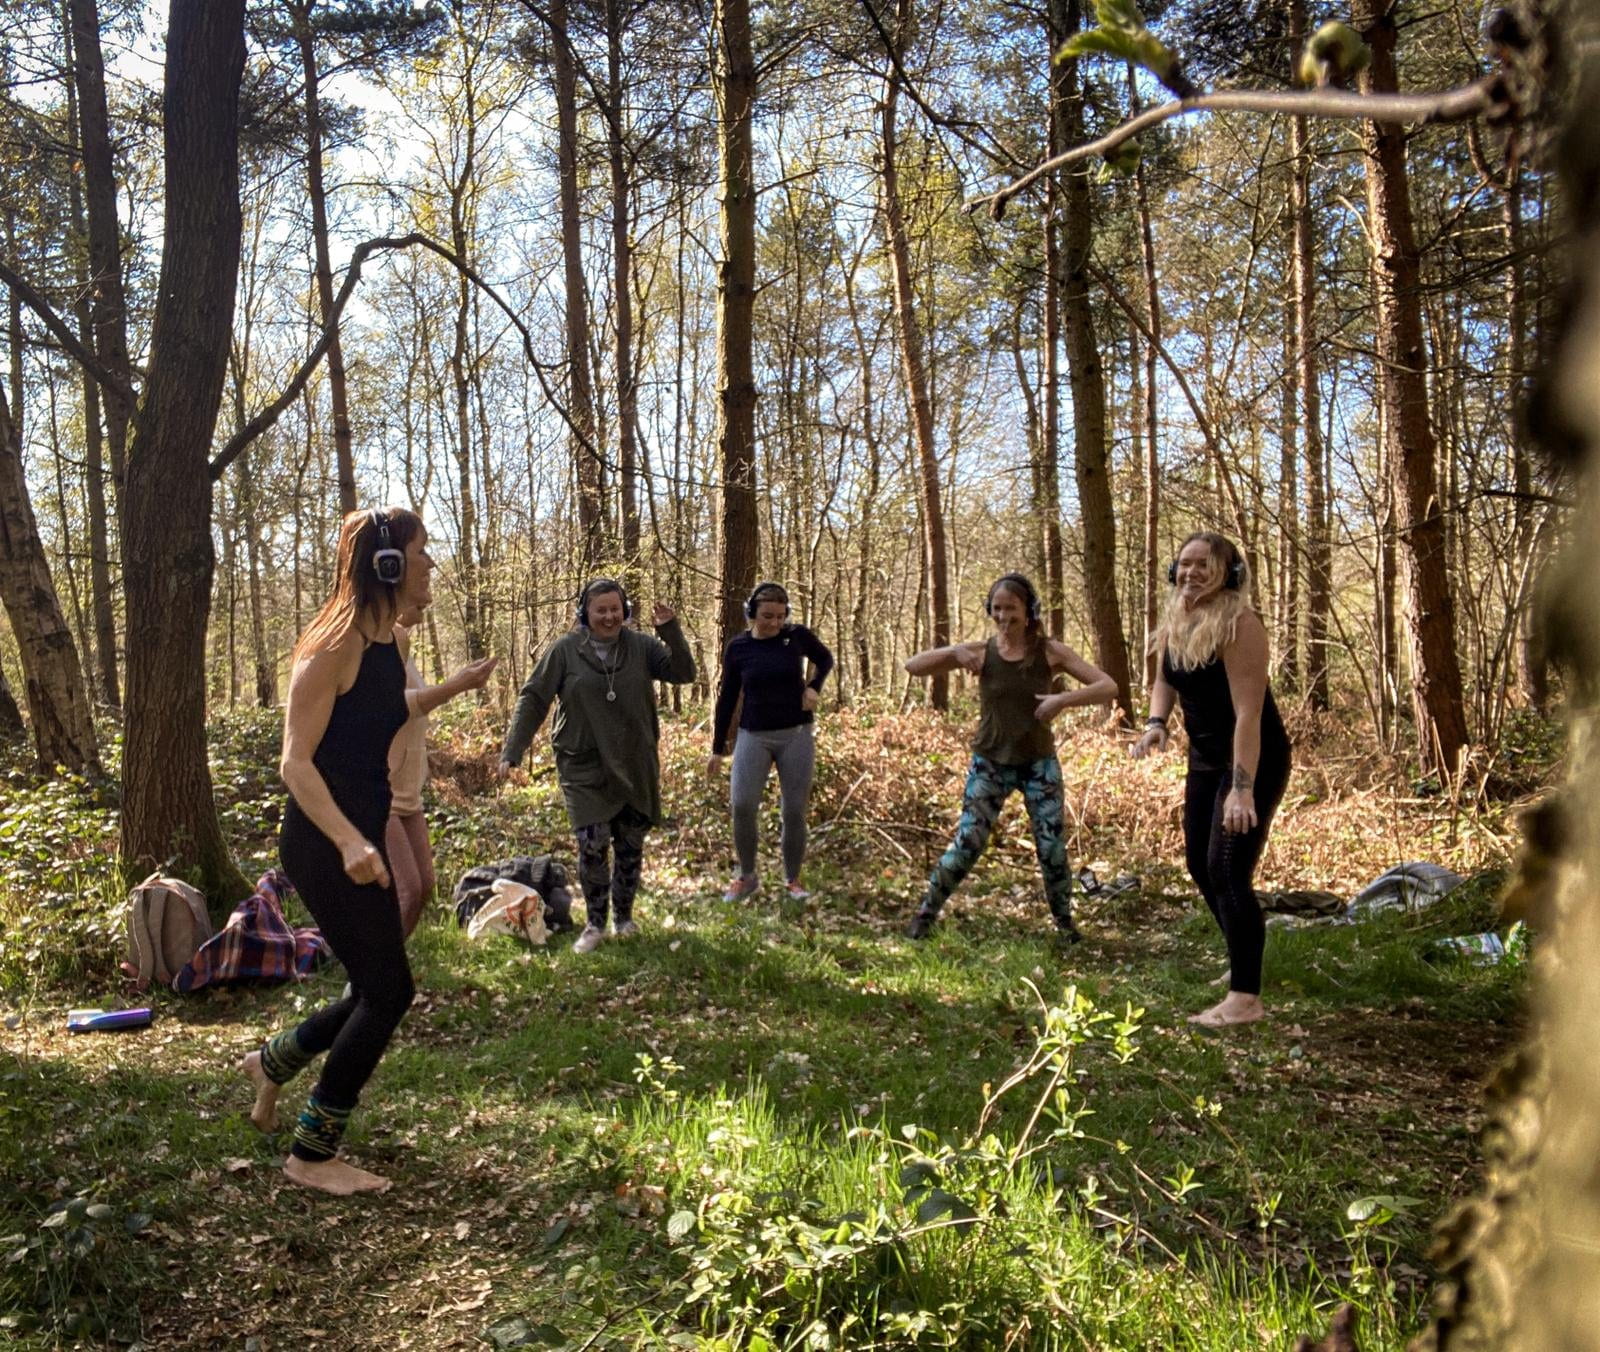 Dance free in nature! Student Life